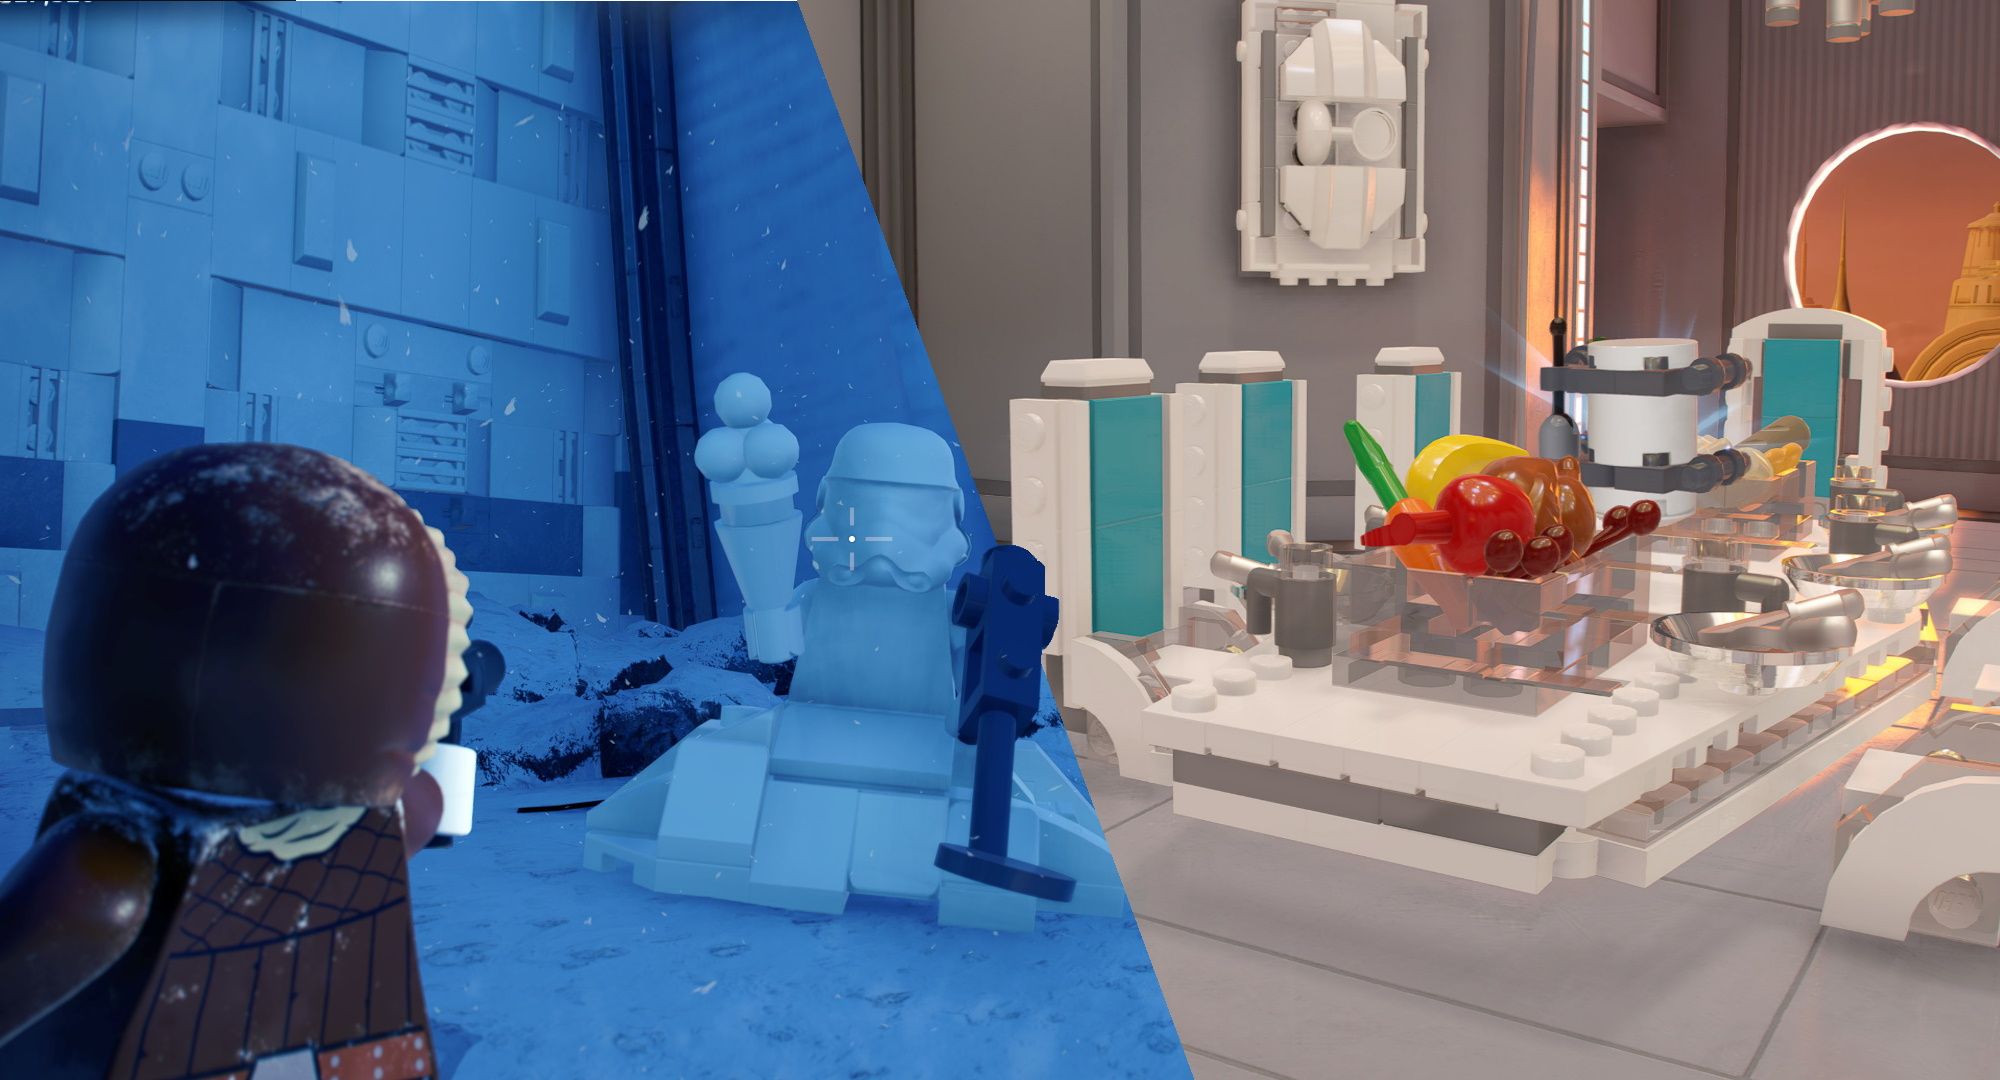 Split image of Han-Solo shooting a snowman and of the Cloud City dining room 